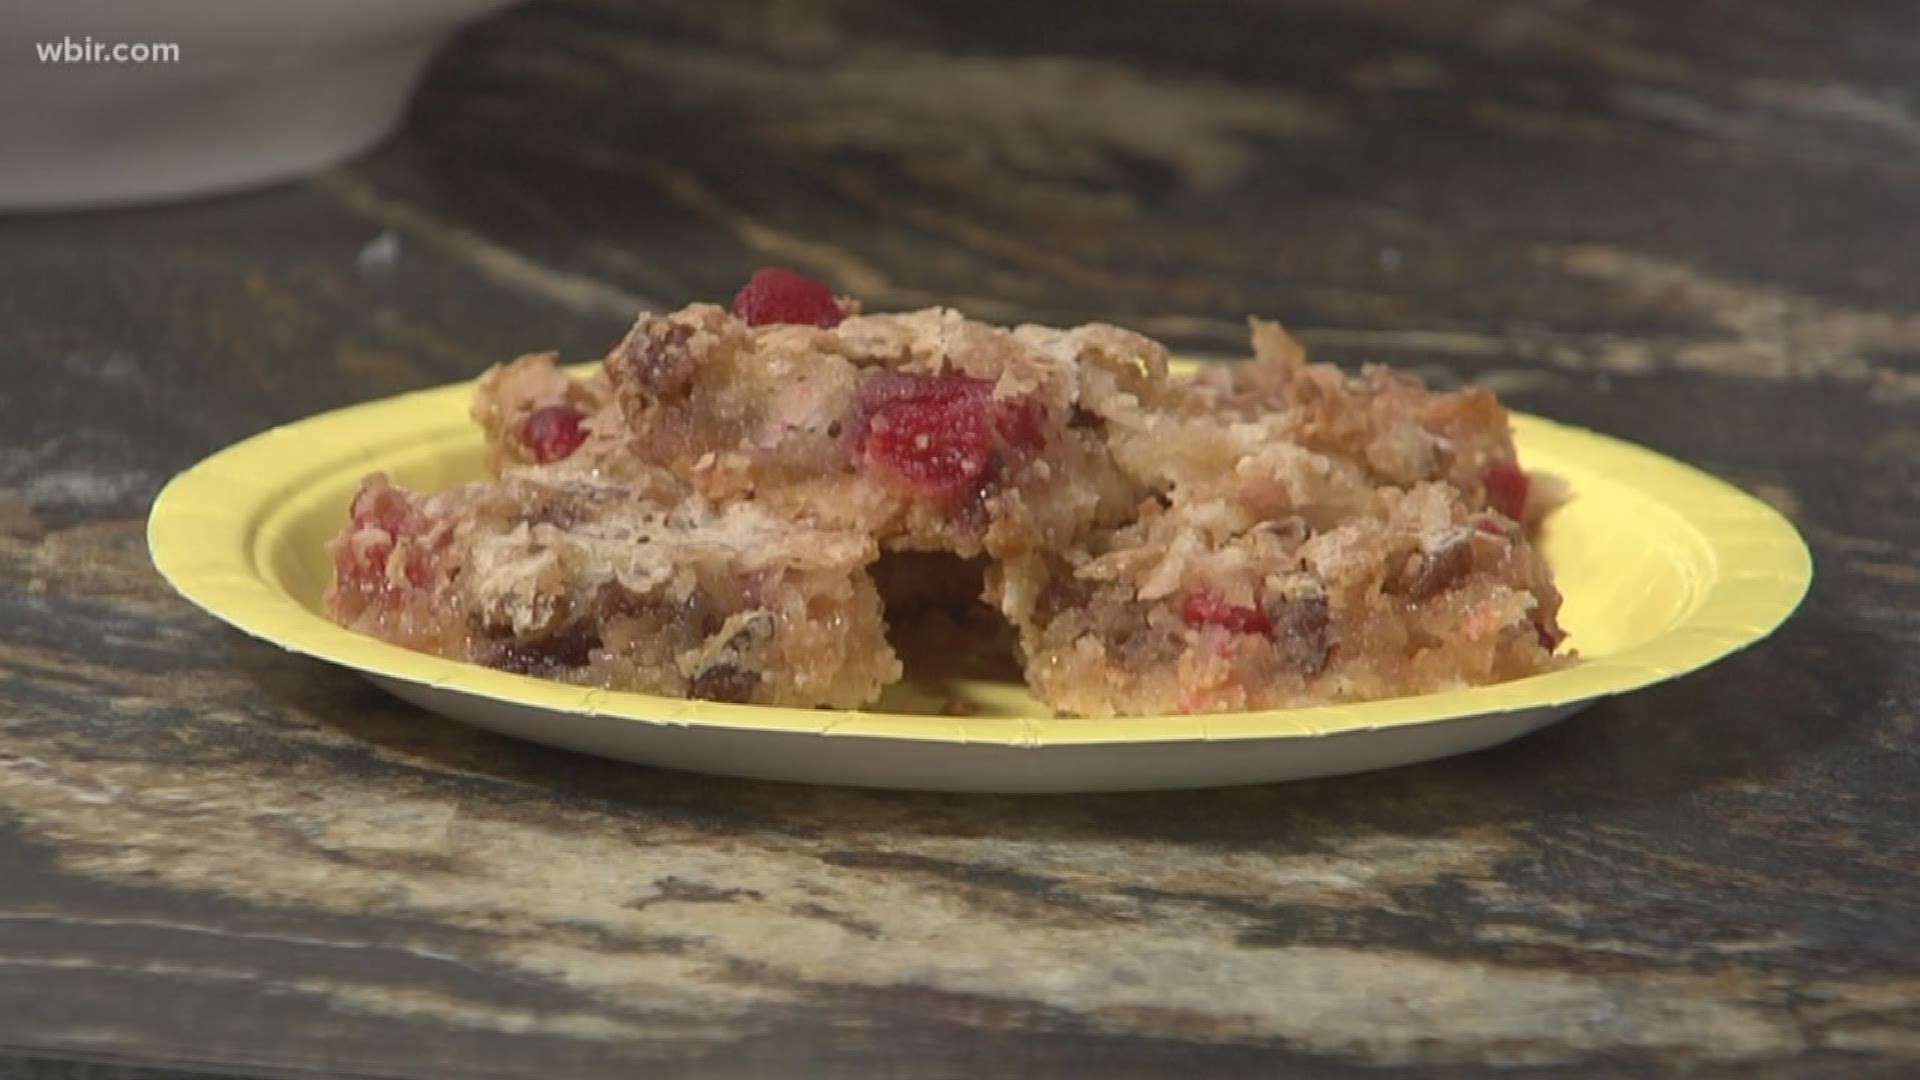 Miss Olivia shares her recipe for Cherry Coconut Squares.